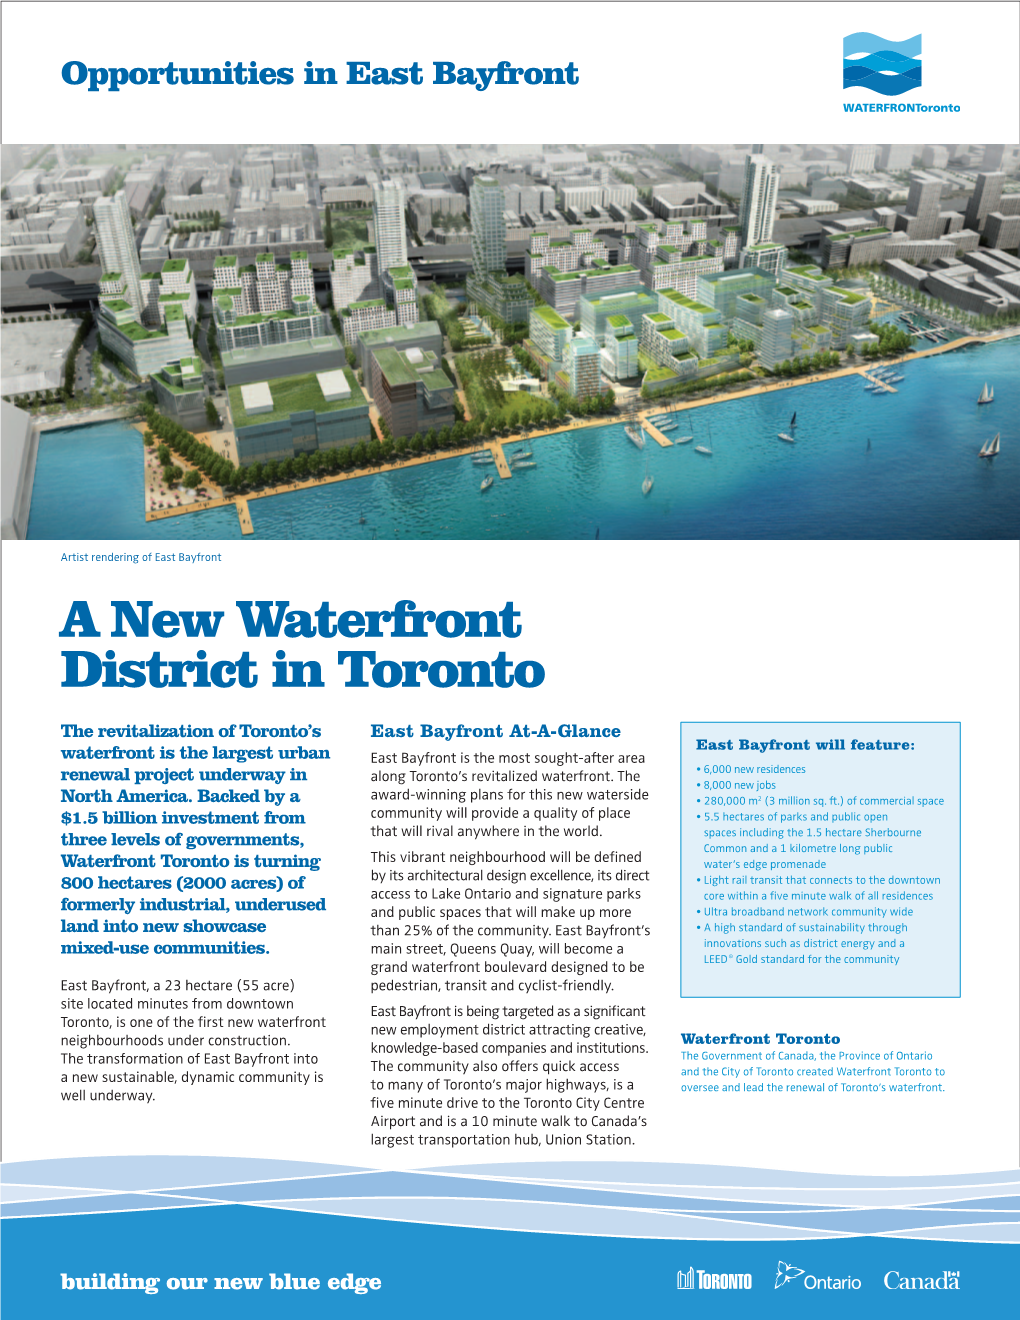 A New Waterfront District in Toronto